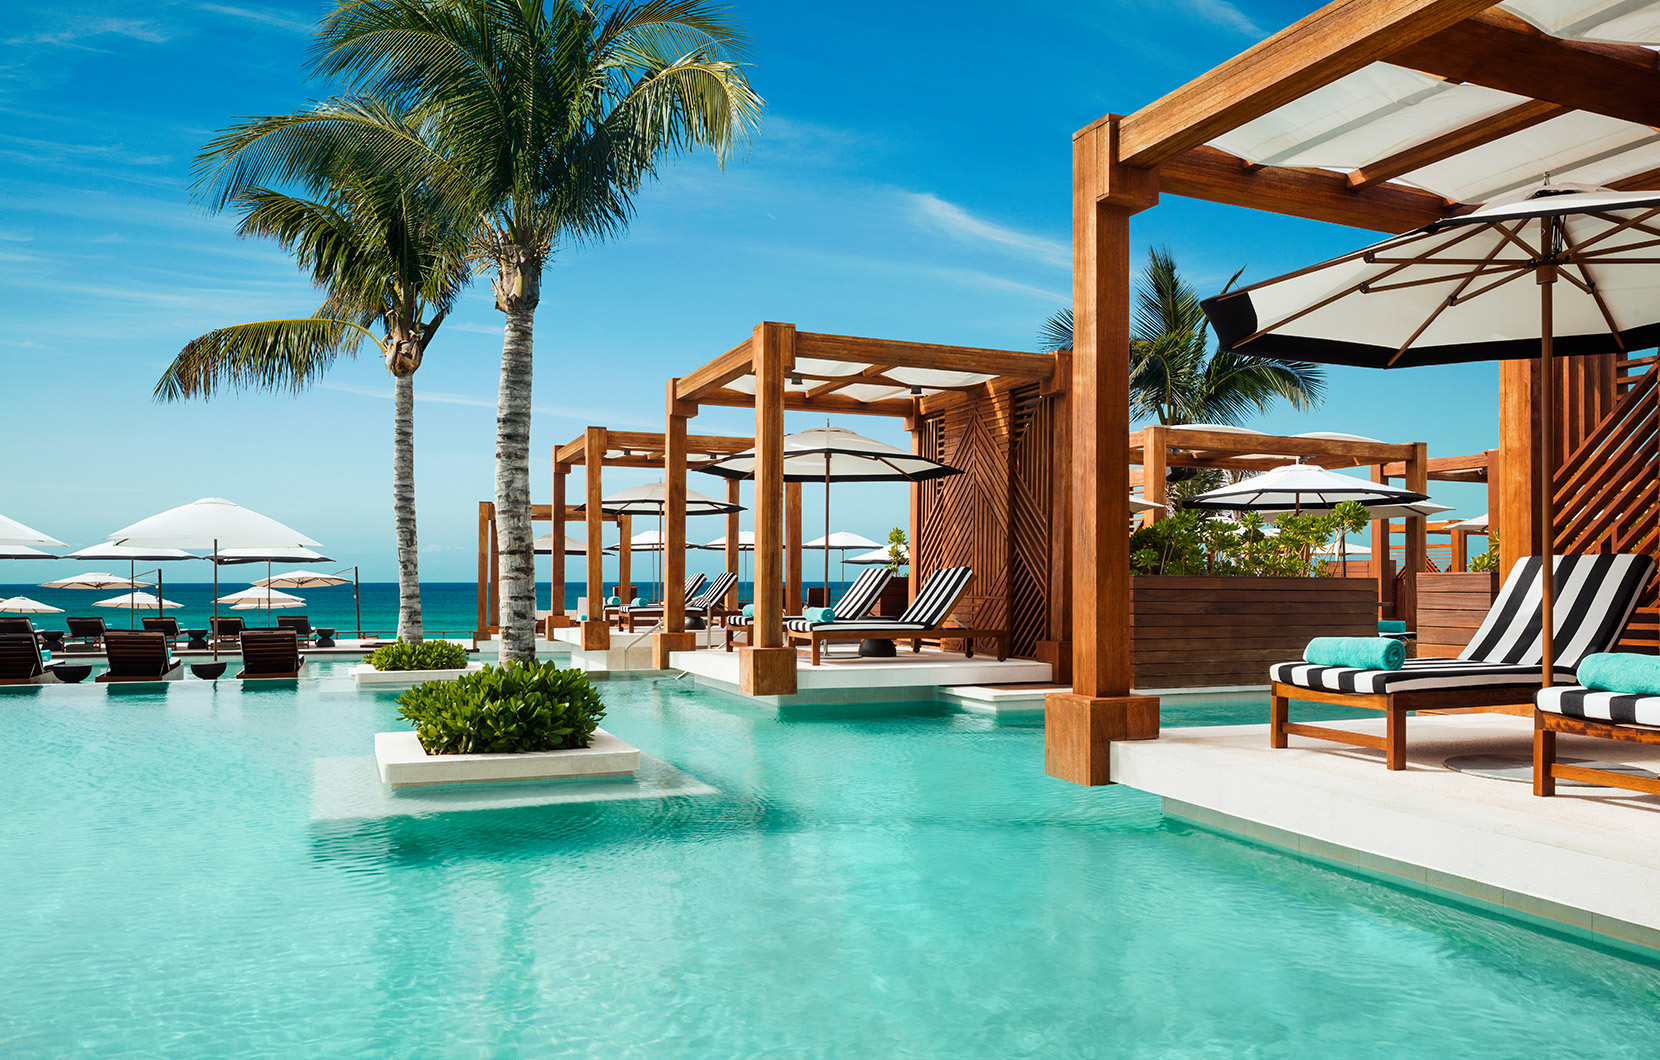 The Beach Club is known for its stunning architecture and stylish décor.